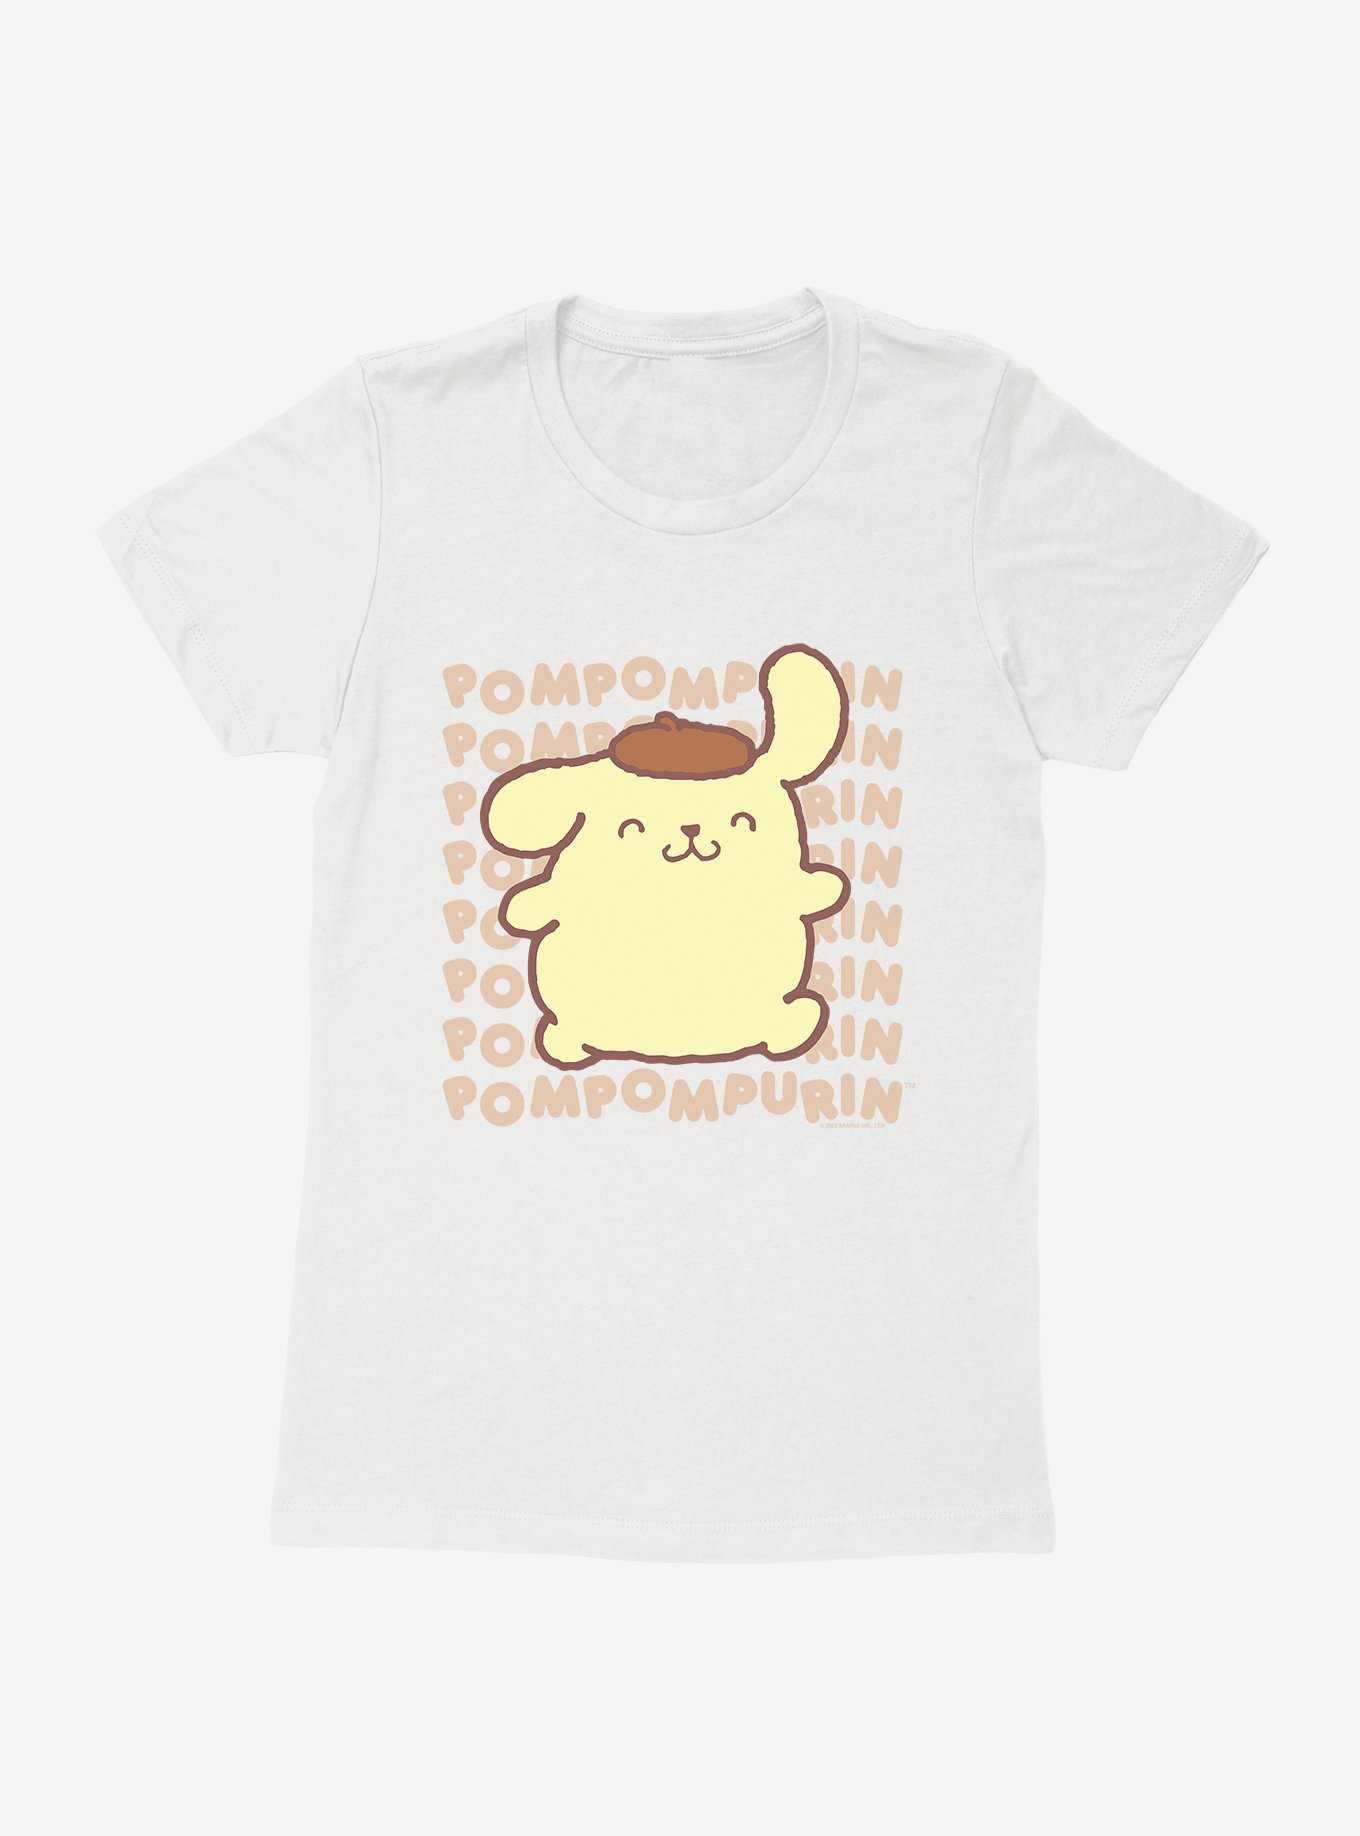 Pompompurin Character Name  Womens T-Shirt, , hi-res